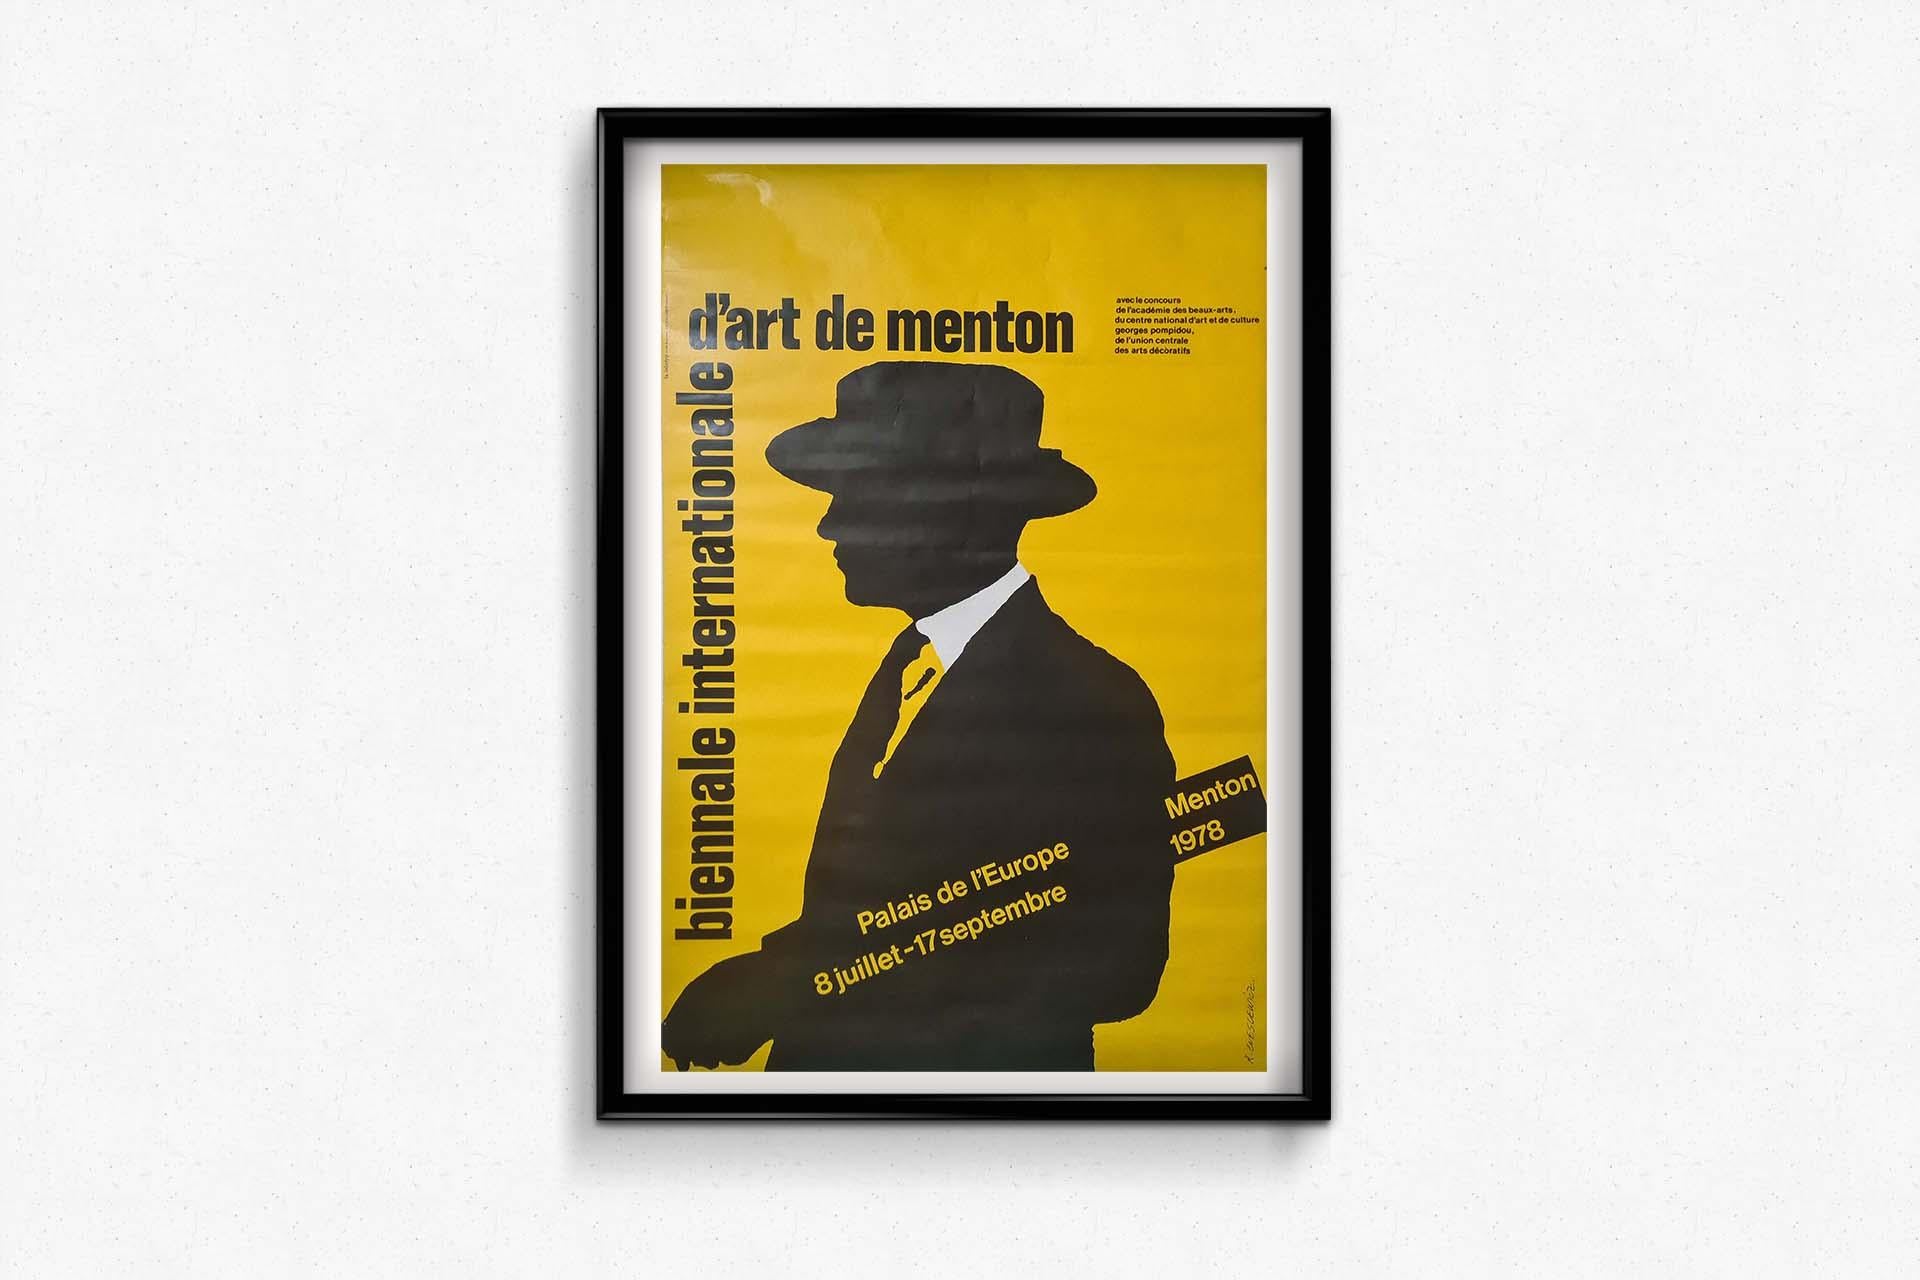 The 1978 original exhibition poster for the Biénnale Internationale d'Art de Menton showcases the innovative design of Roman Cieslewicz, a prominent figure in the world of graphic design. Cieslewicz's poster serves as both an invitation and a